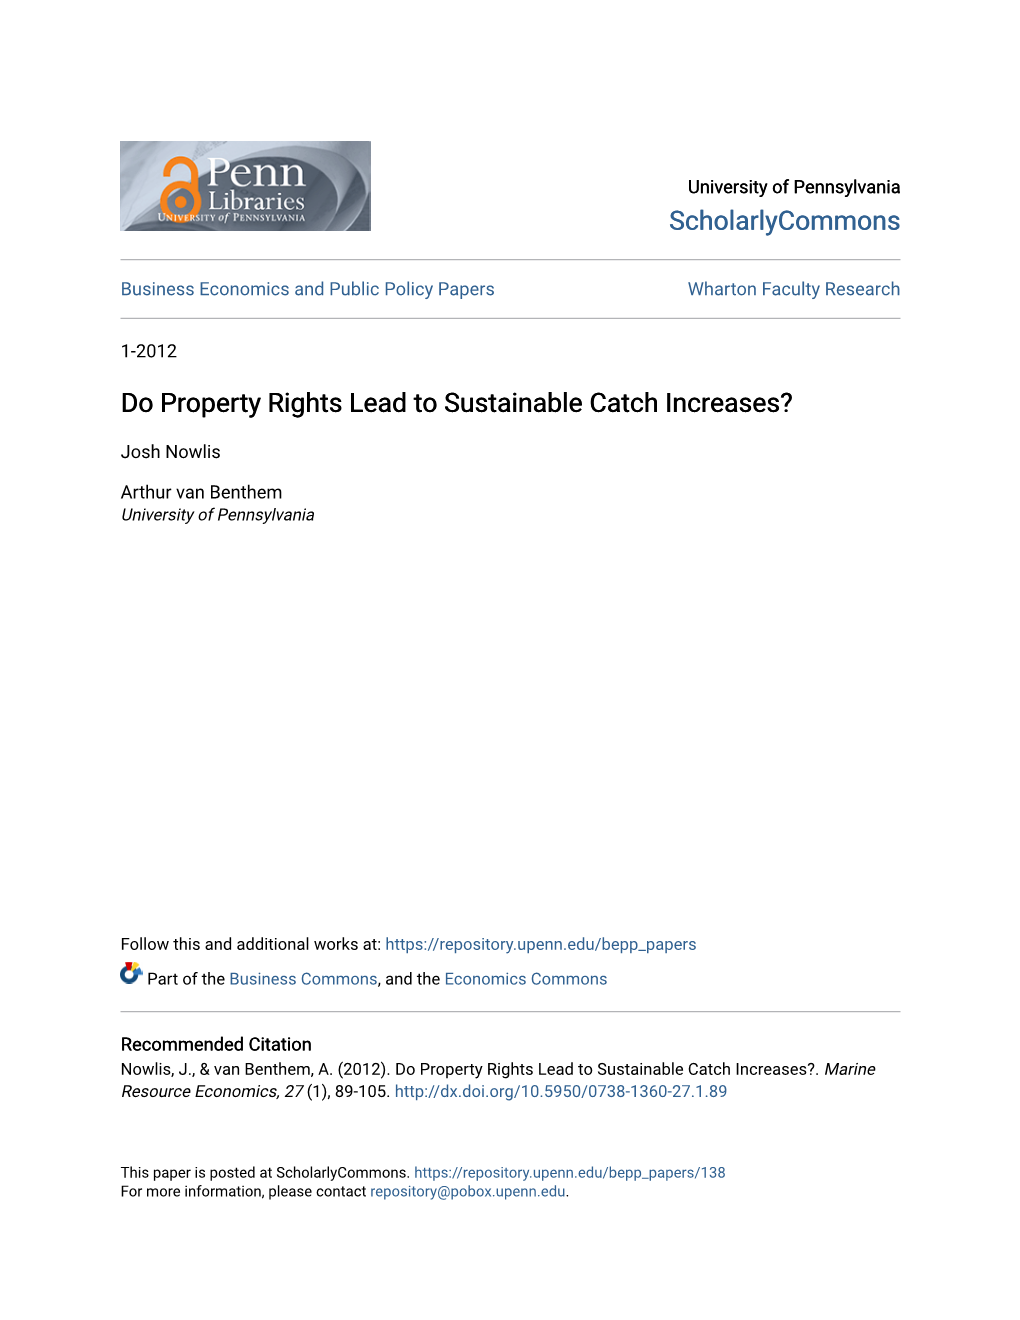 Do Property Rights Lead to Sustainable Catch Increases?